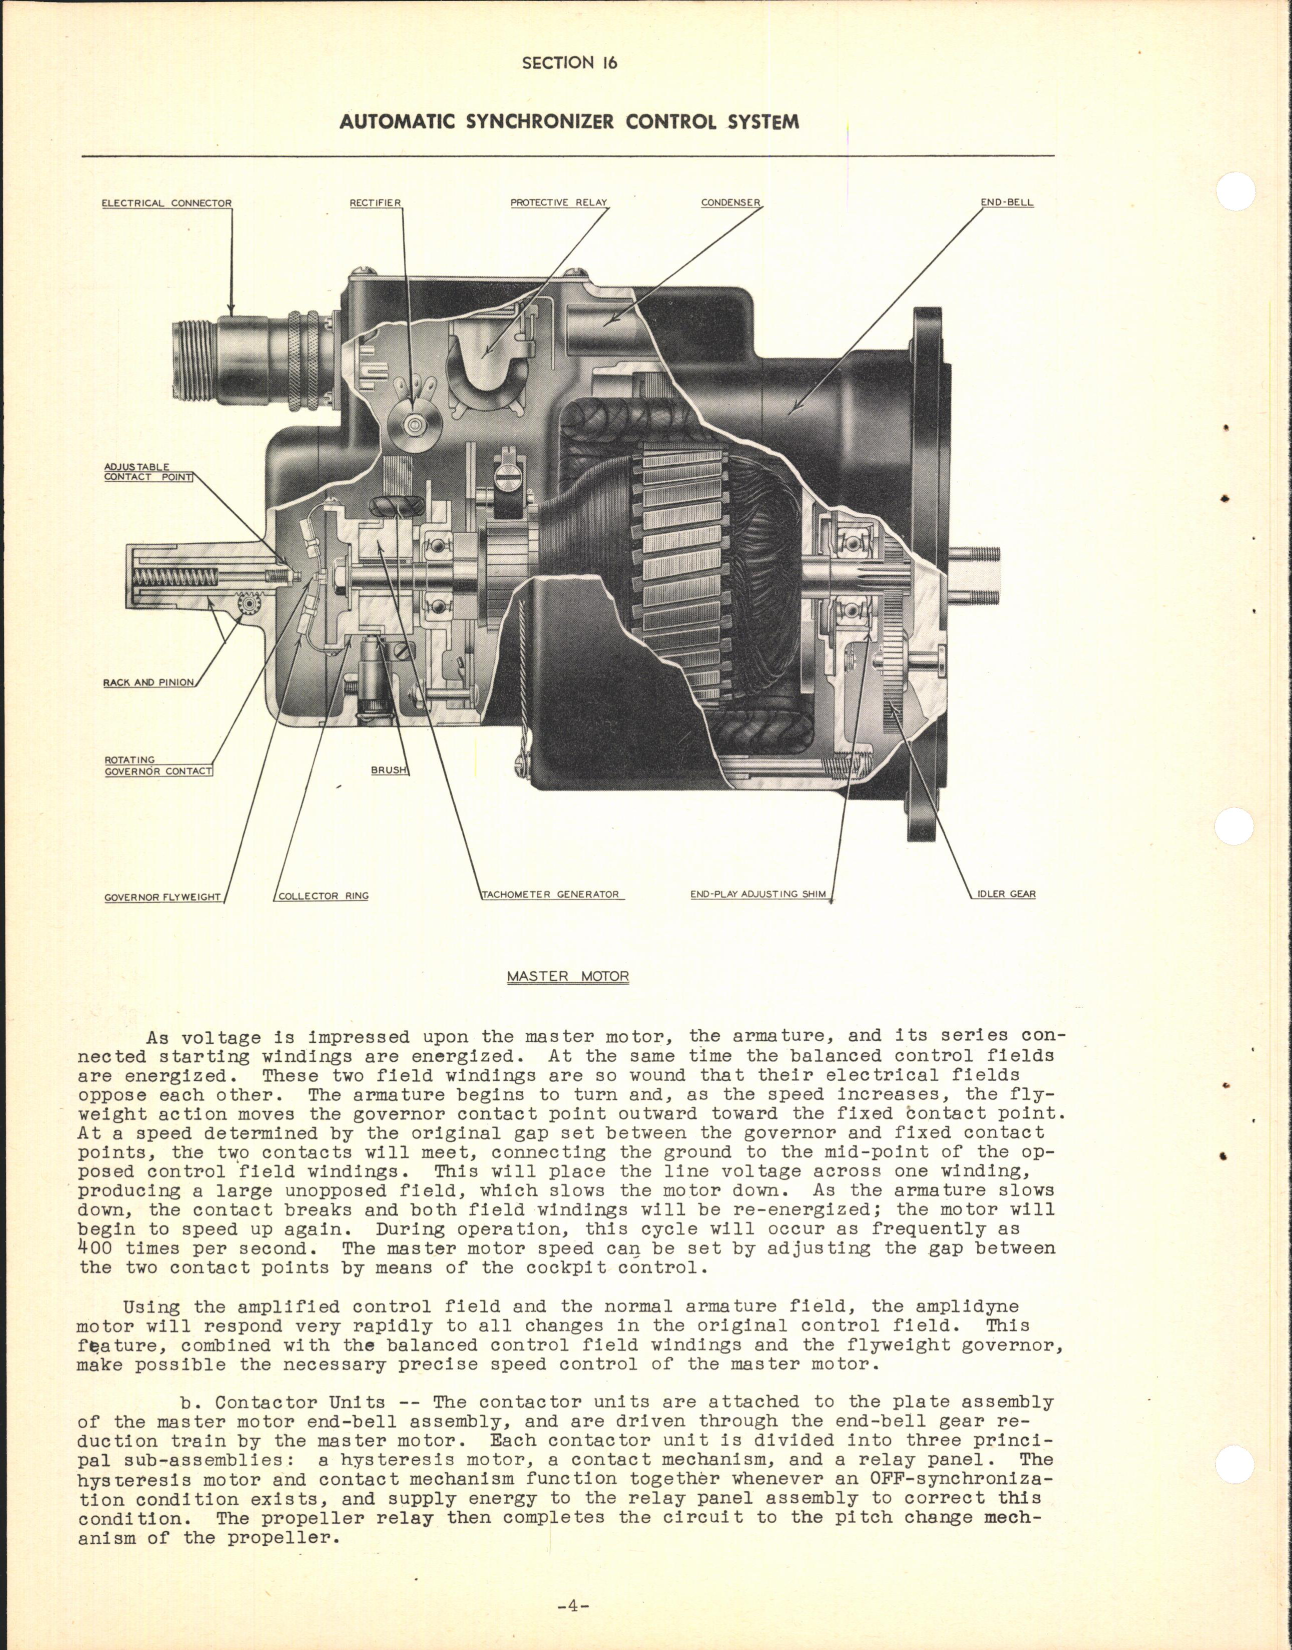 Sample page 6 from AirCorps Library document: Section 16 - Automatic Synchronizer Control System